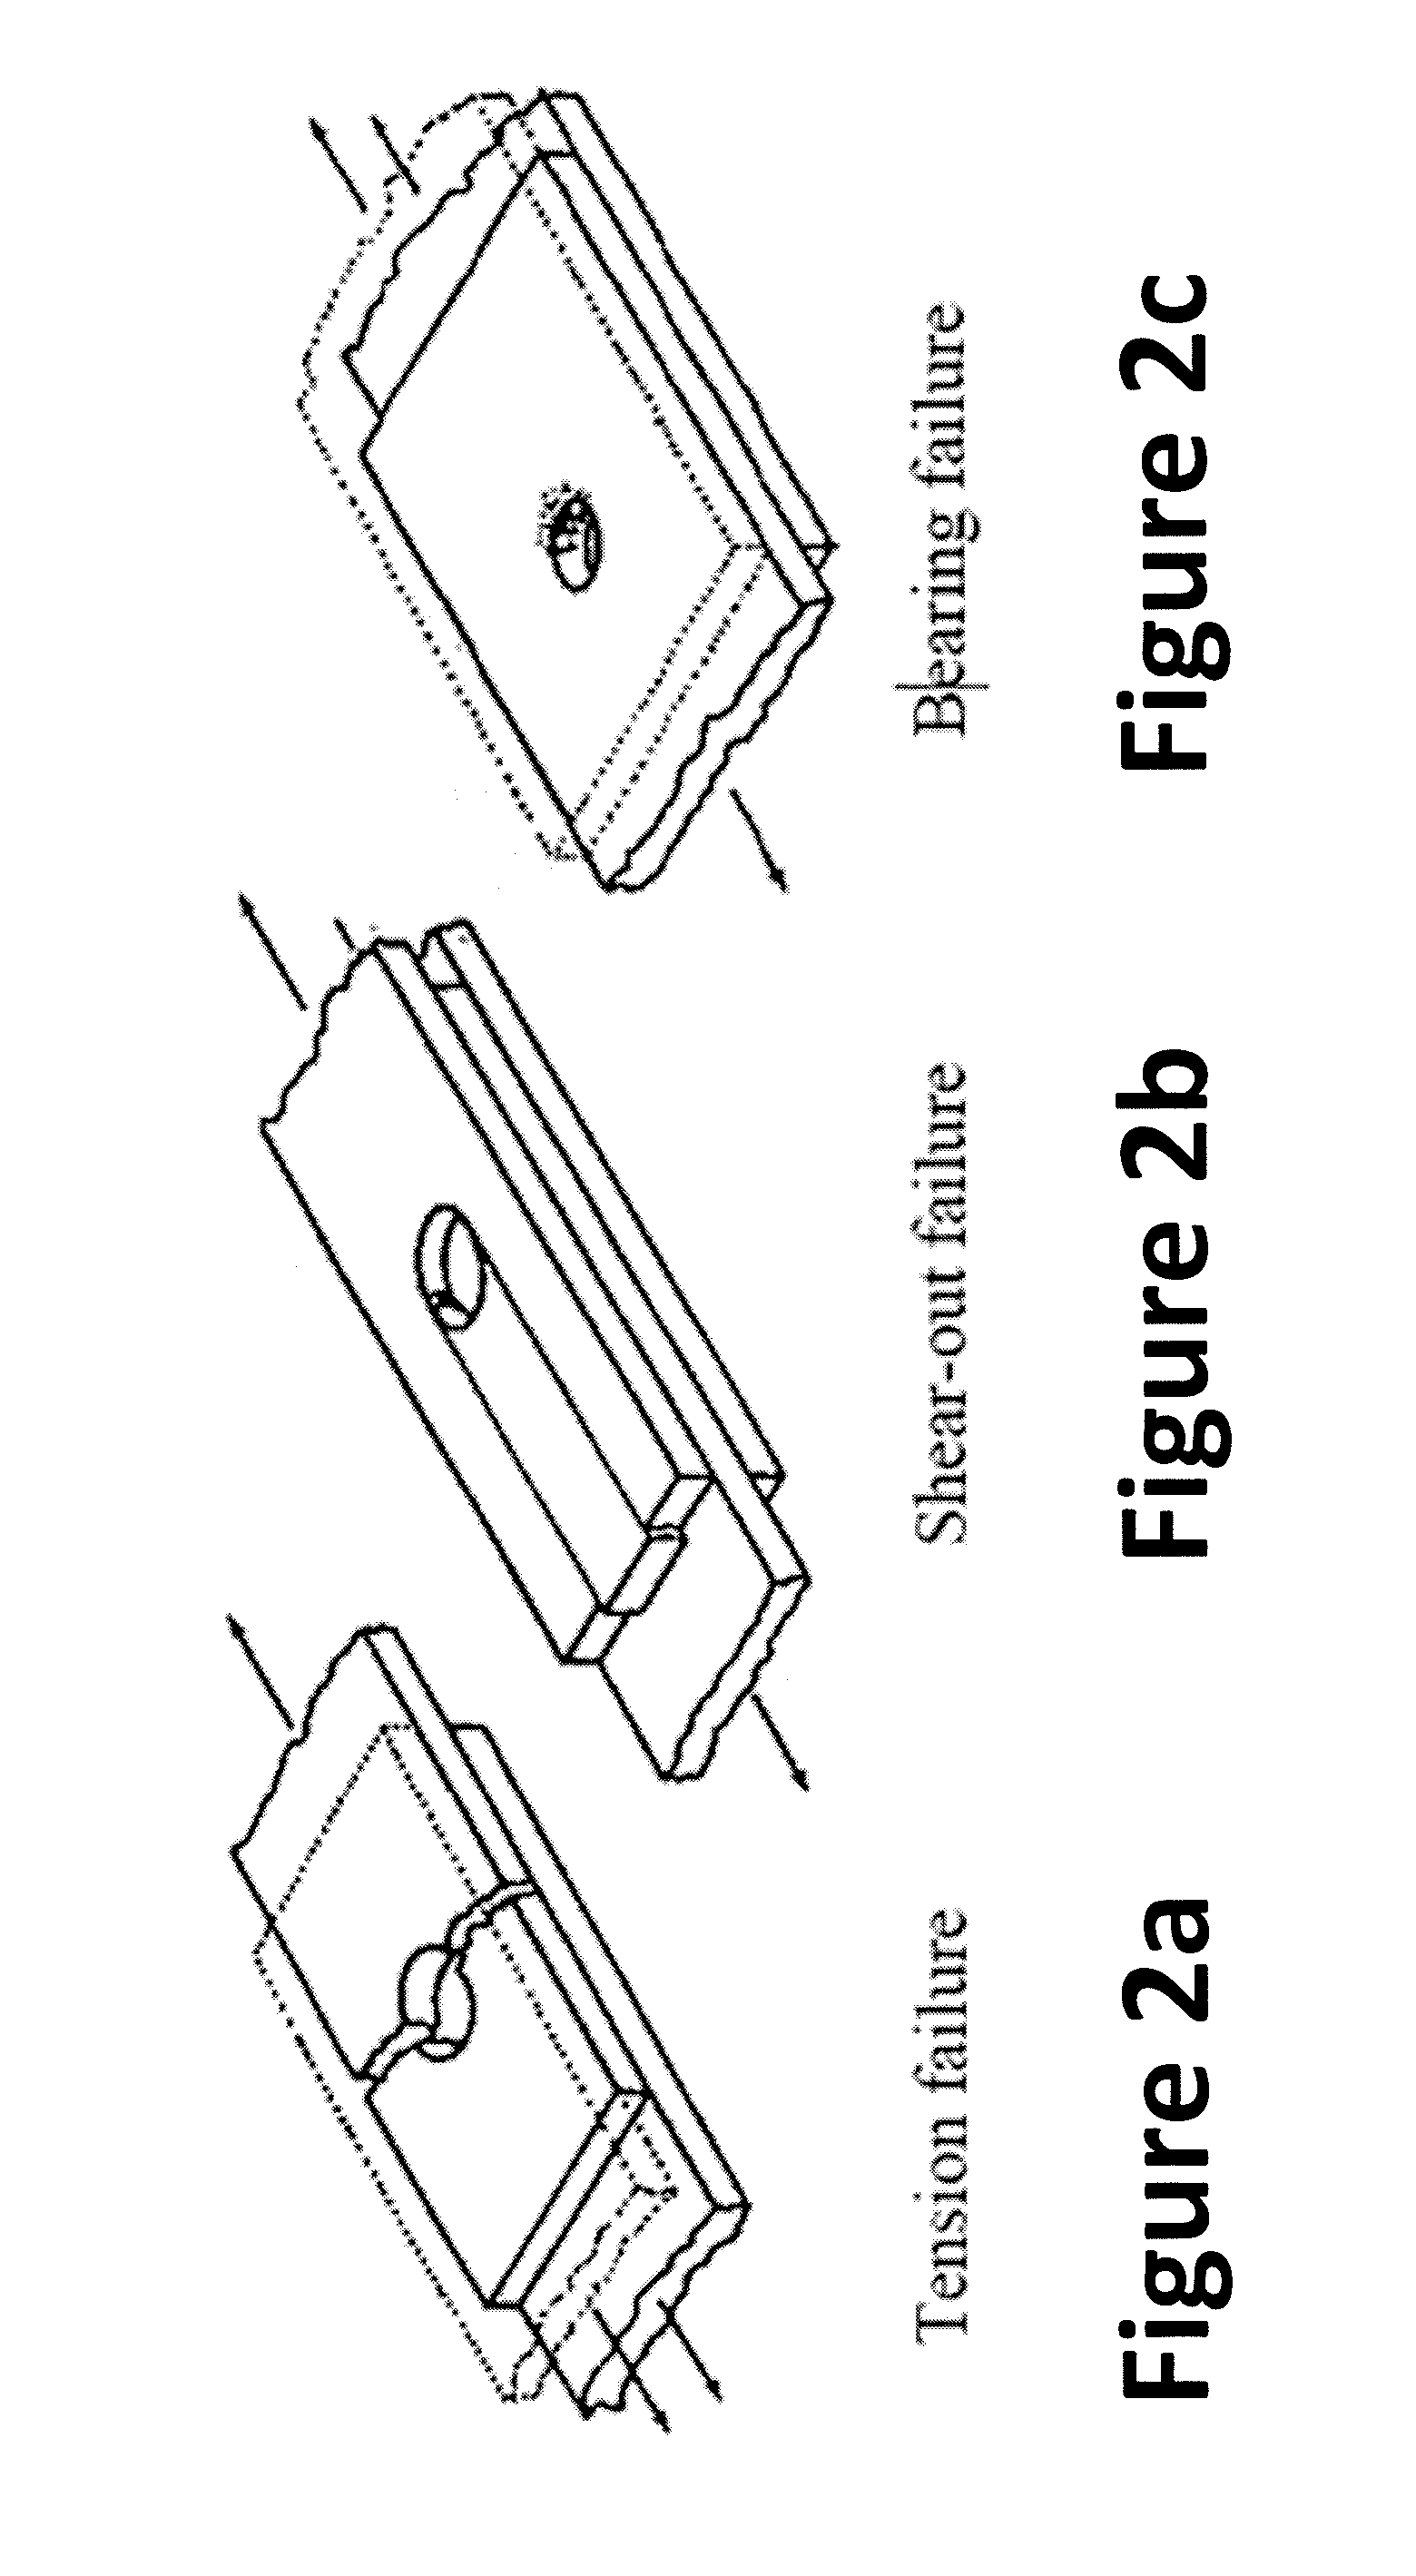 Integral Composite Bushing System and Method